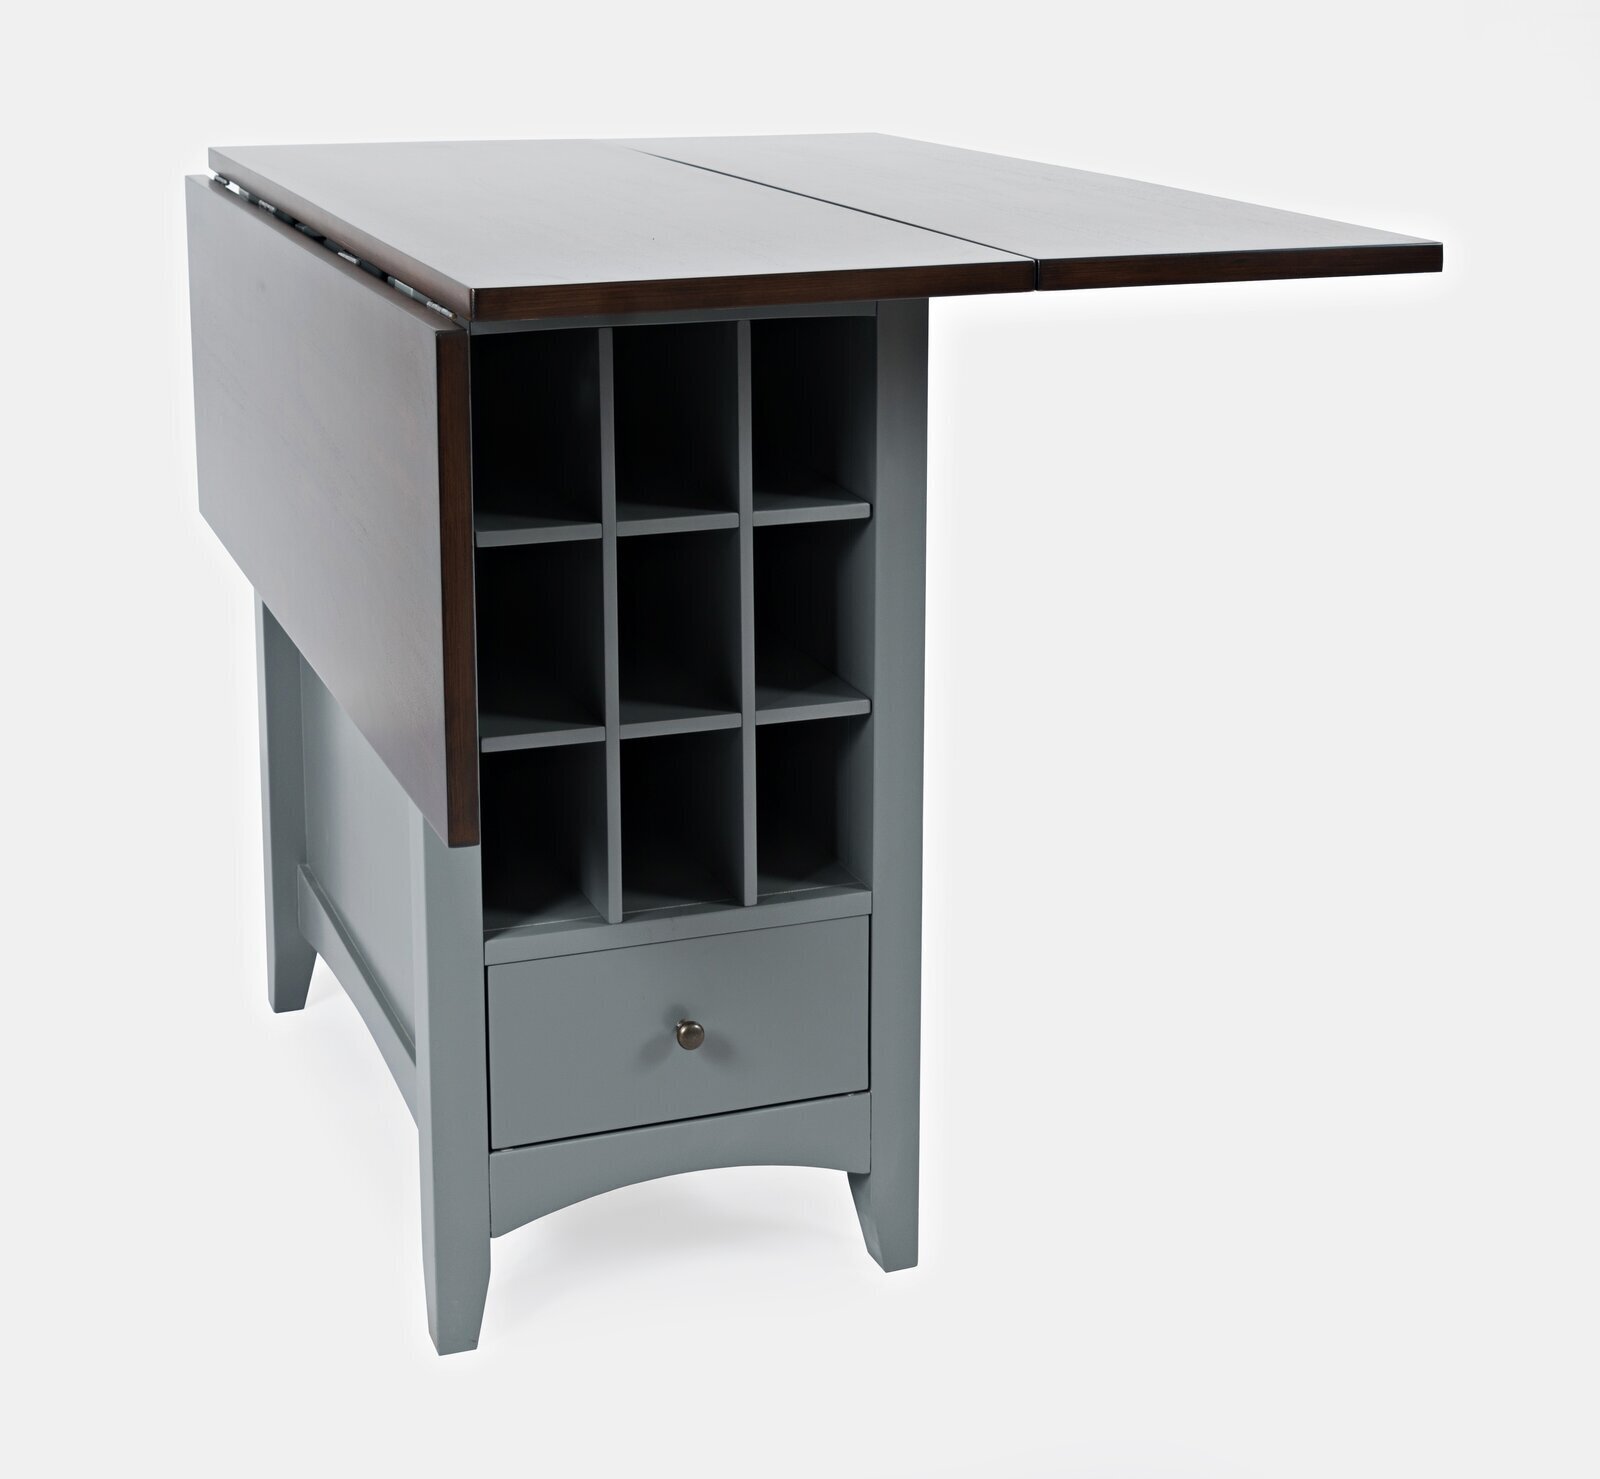 Small counter height dining table with wine cubbies